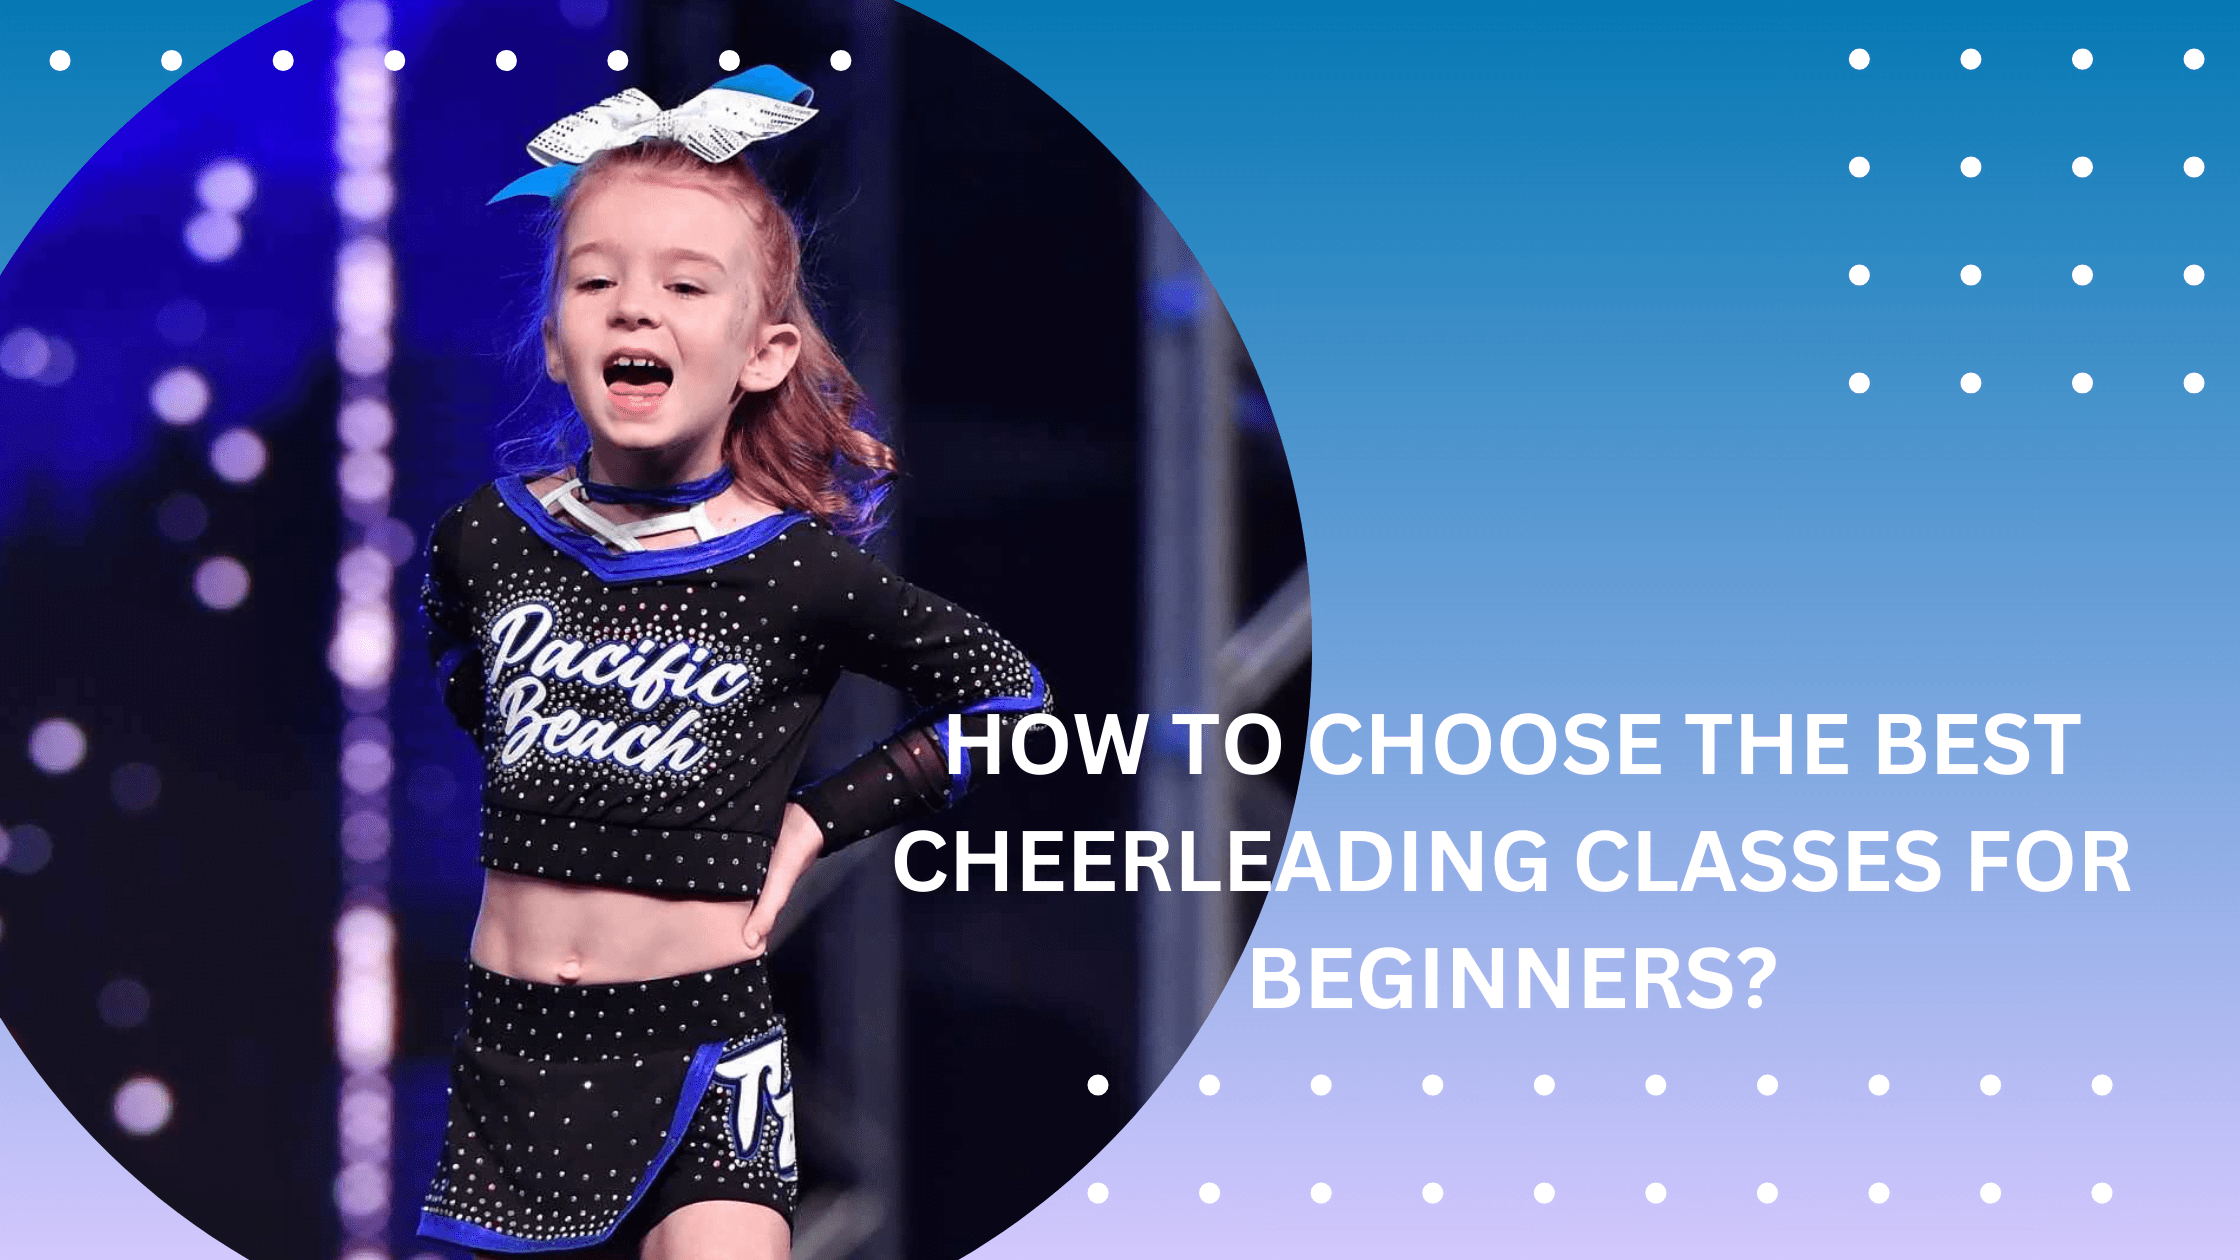 Cheer gyms in San Diego, All star cheerleading, All star cheer in san diego, Tumbling Classes San Diego,